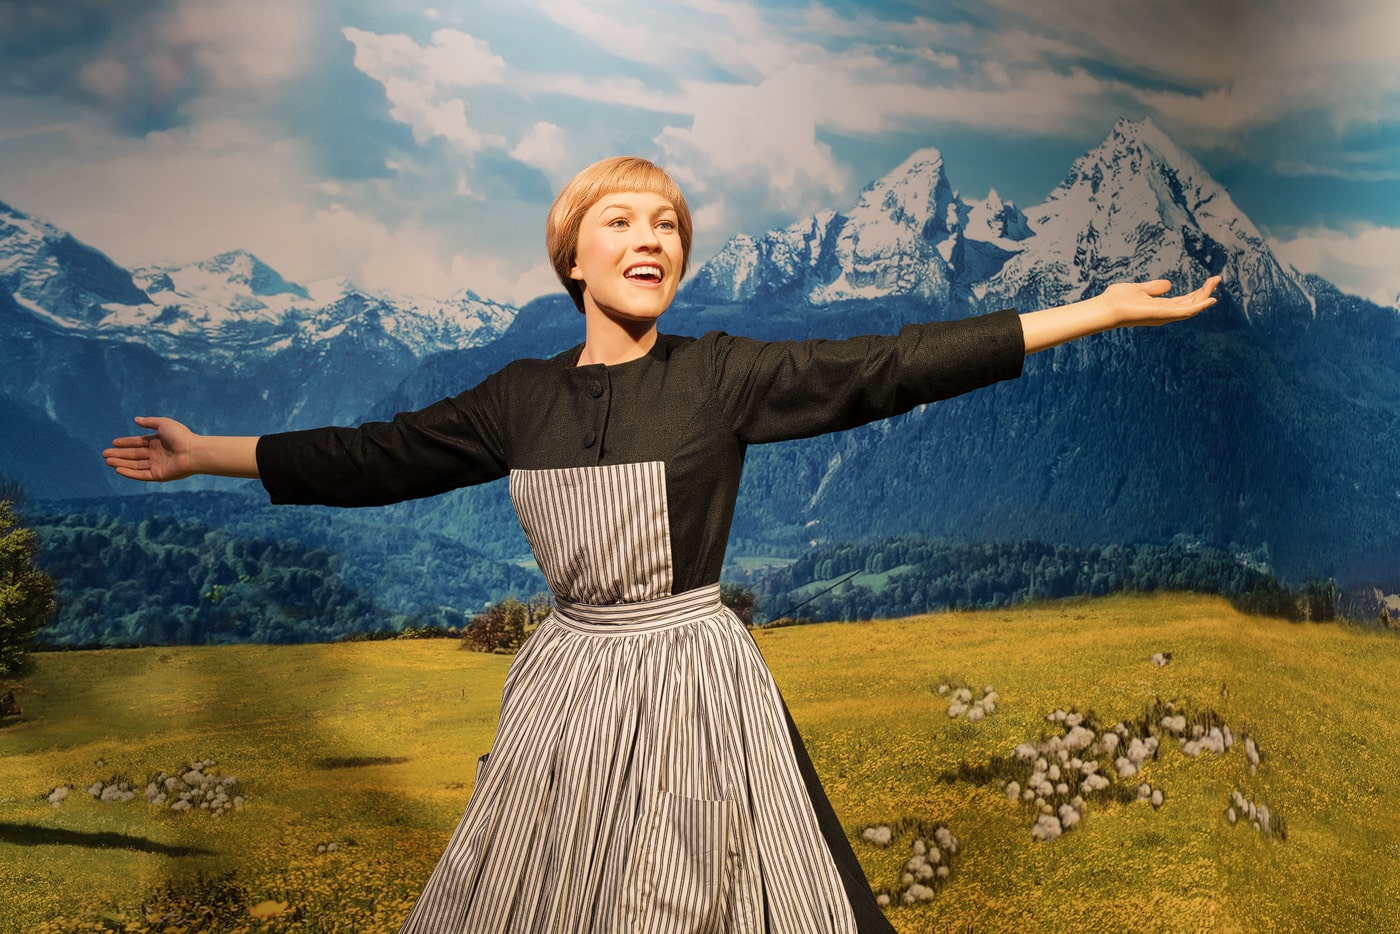 Take a selfie with Julie Andrews at Madame Tussauds Vienna!